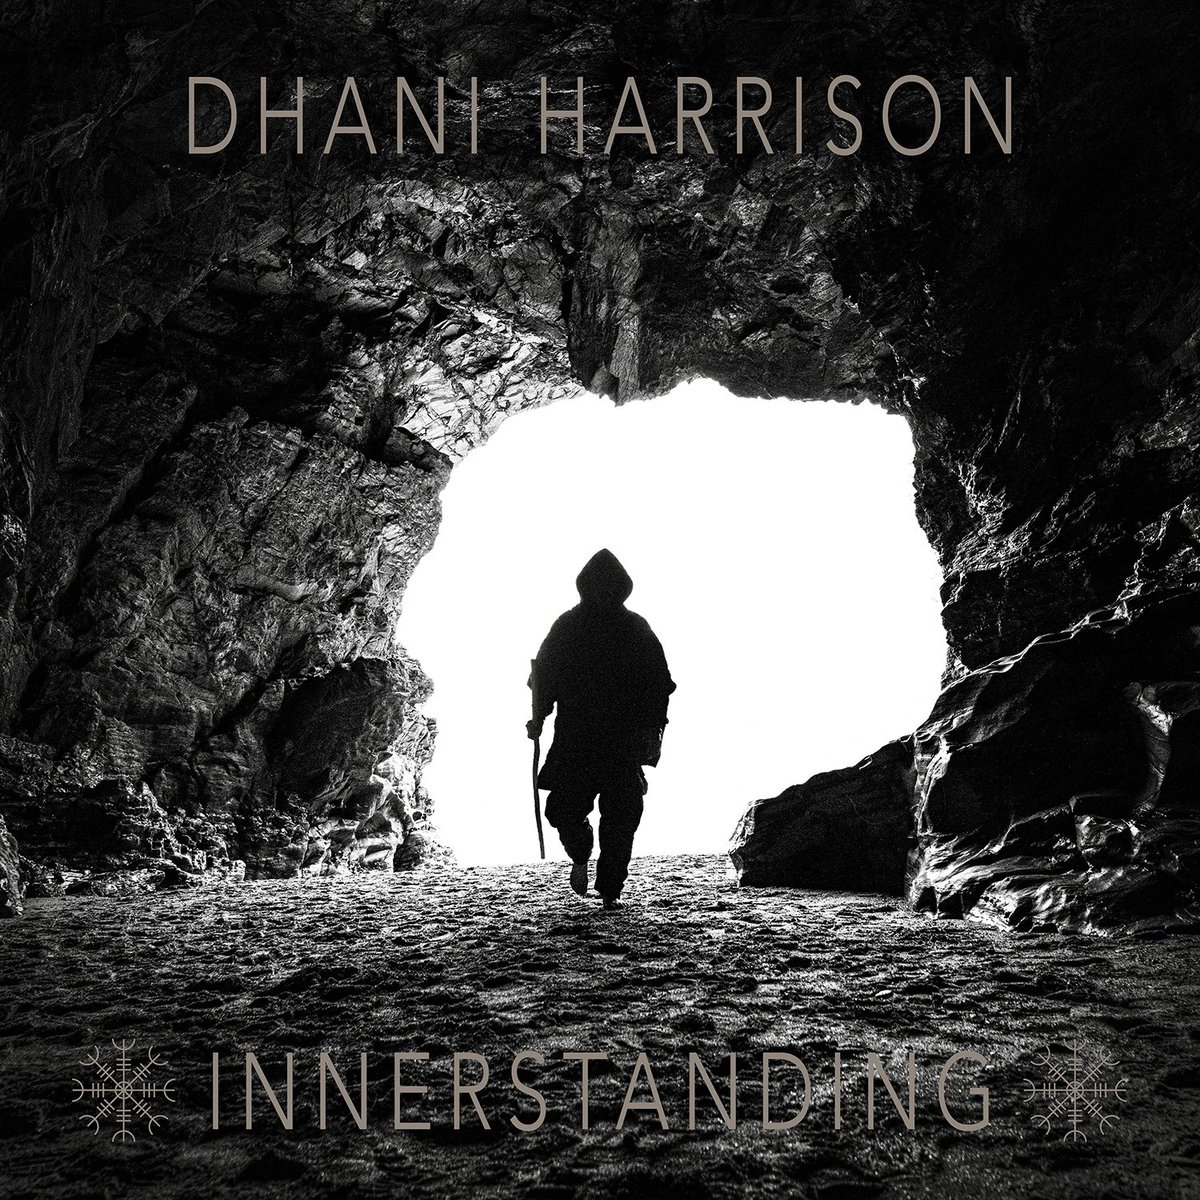 INNERSTANDING, the second solo album from @DhaniHarrison, is now available on all streaming platforms and in spatial audio. Go listen here - dhaniharrison.lnk.to/DhaniHarrisonWE - today. We hope you dig it. x